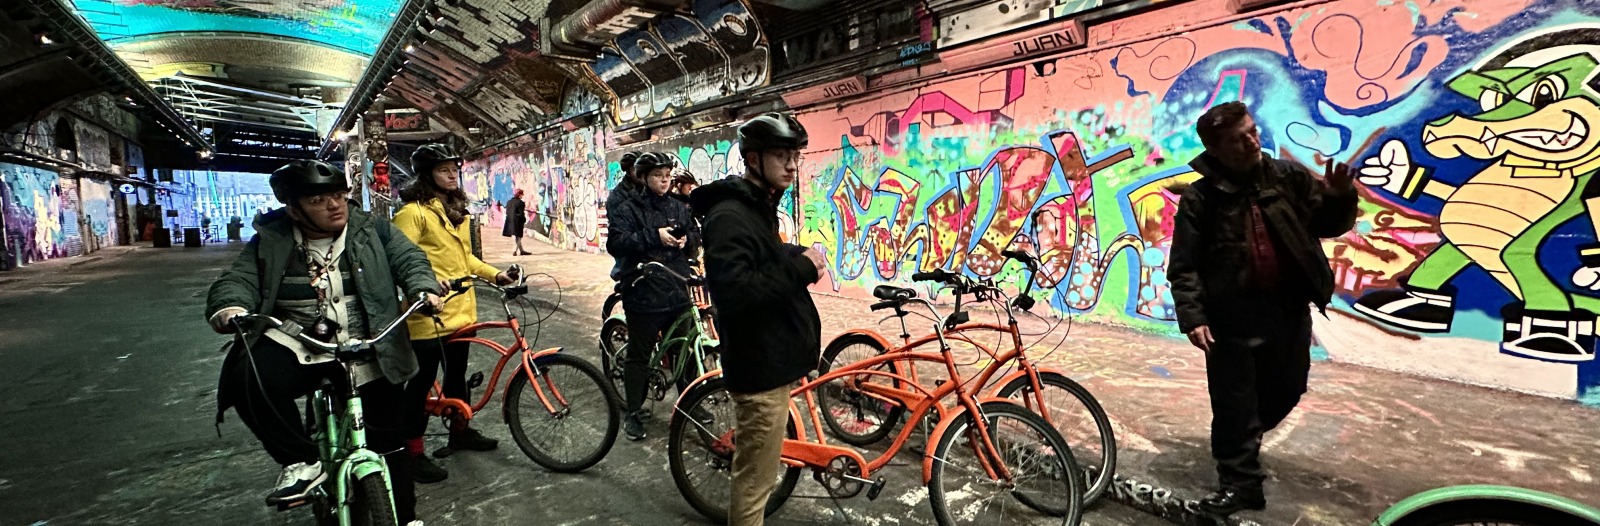 GIL students on cycling route around London in street art tunnel